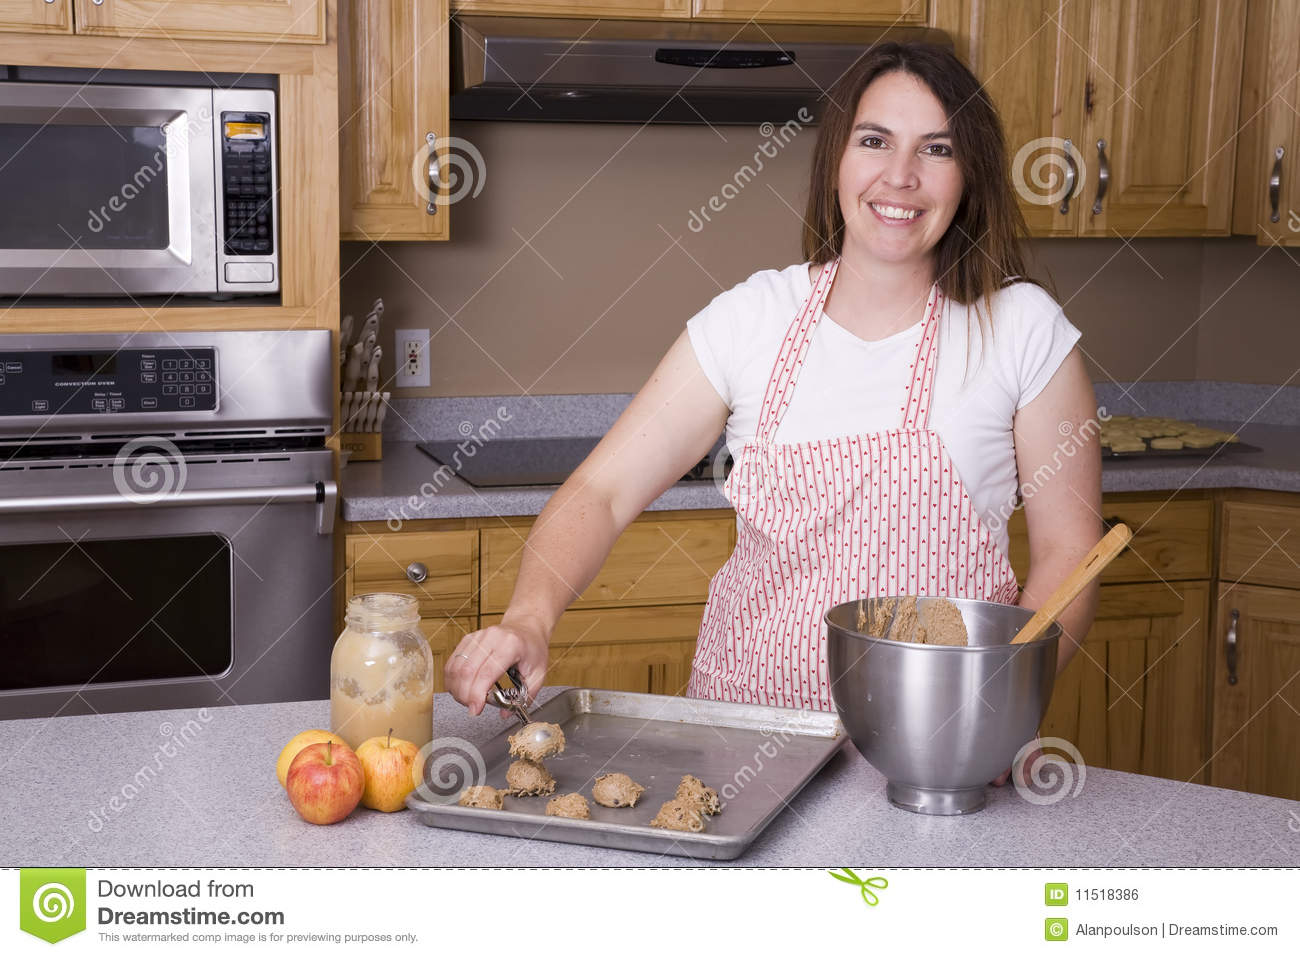 Woman Cookie Royalty Free Stock Image   Image  11518386